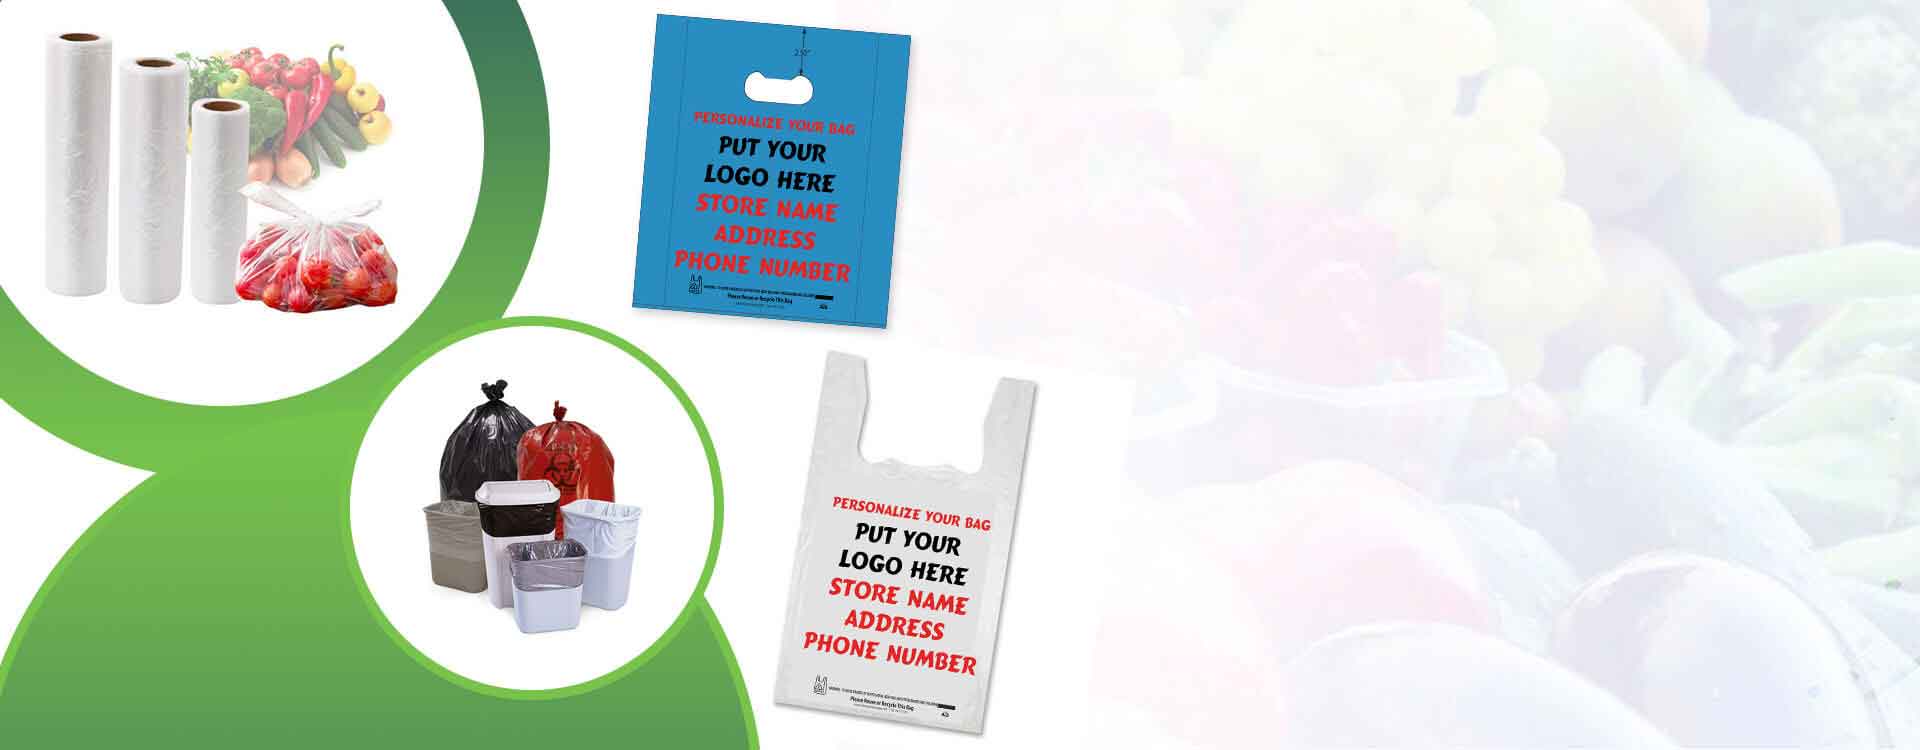 Retail Carry Bags - Branding Your Business Through Plastic Carrier Bags